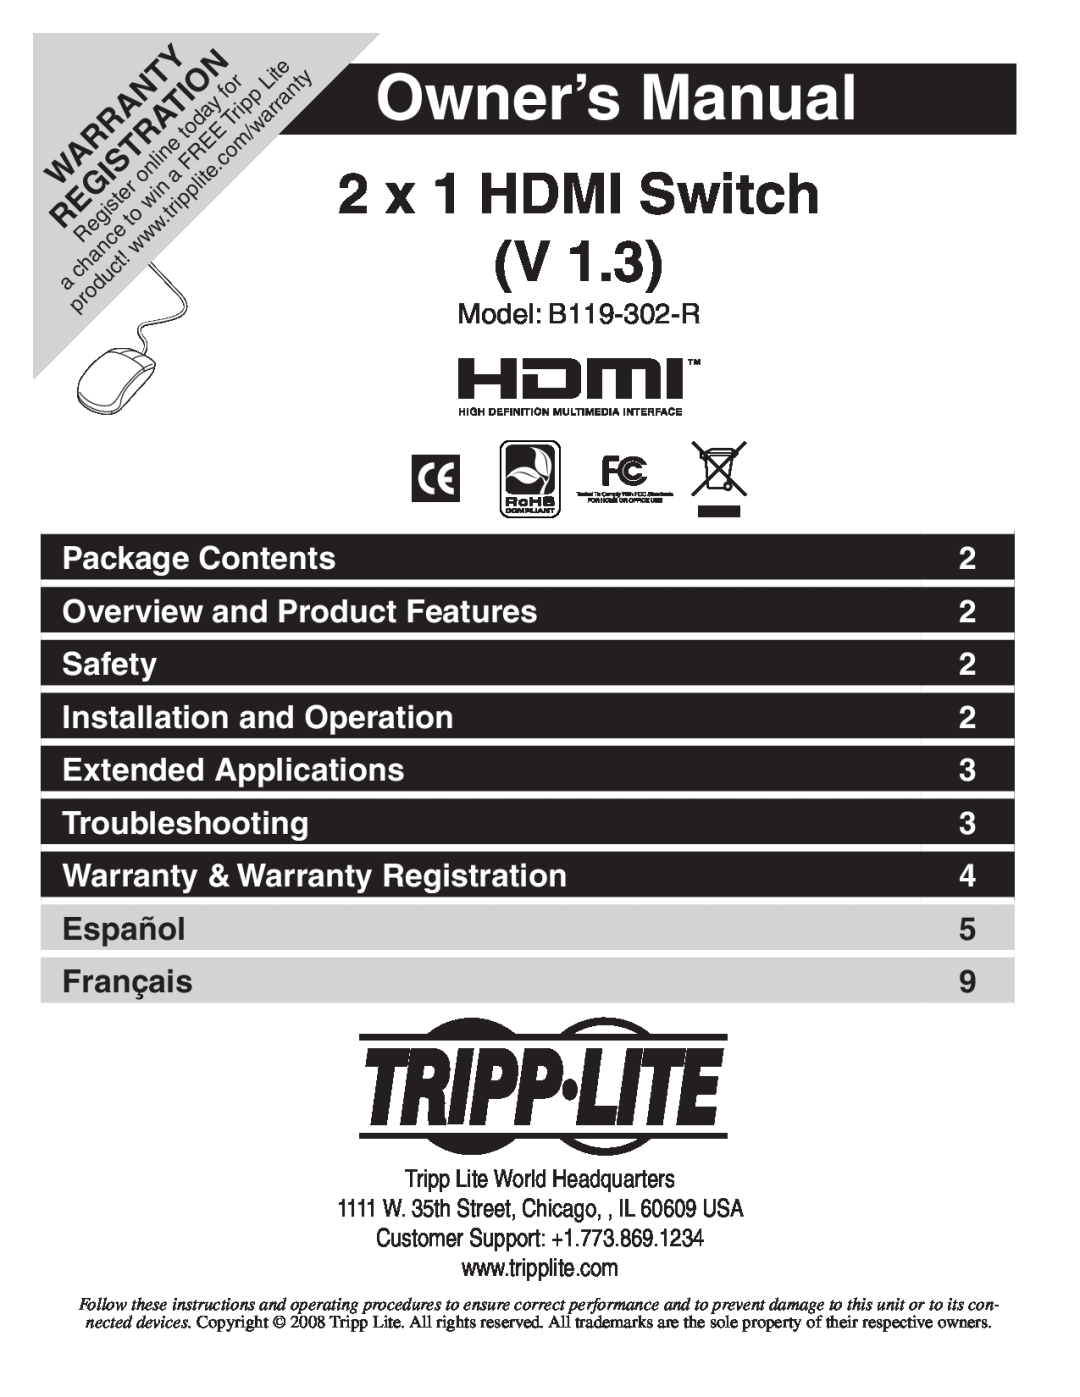 Tripp Lite B119-302-R owner manual 2 x 1 HDMI Switch V, Package Contents, Overview and Product Features, Safety, Español 